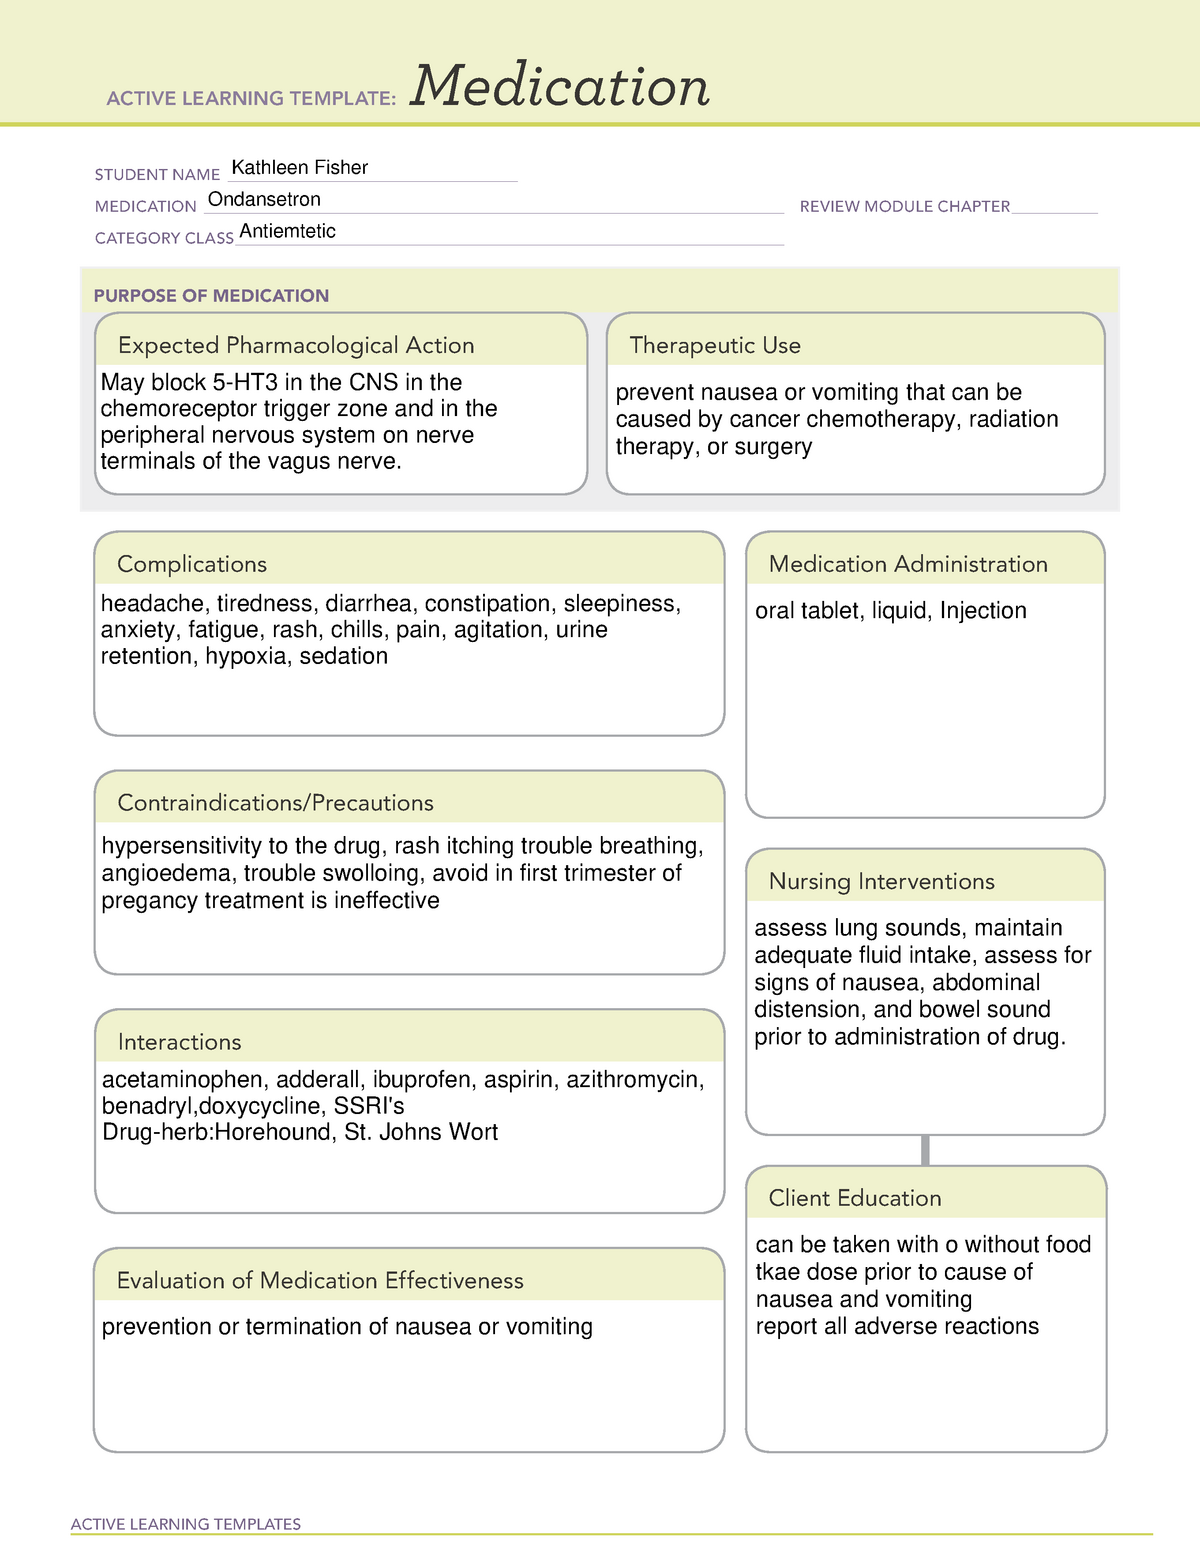 medtemp-ondansetron-ati-medication-system-template-active-learning